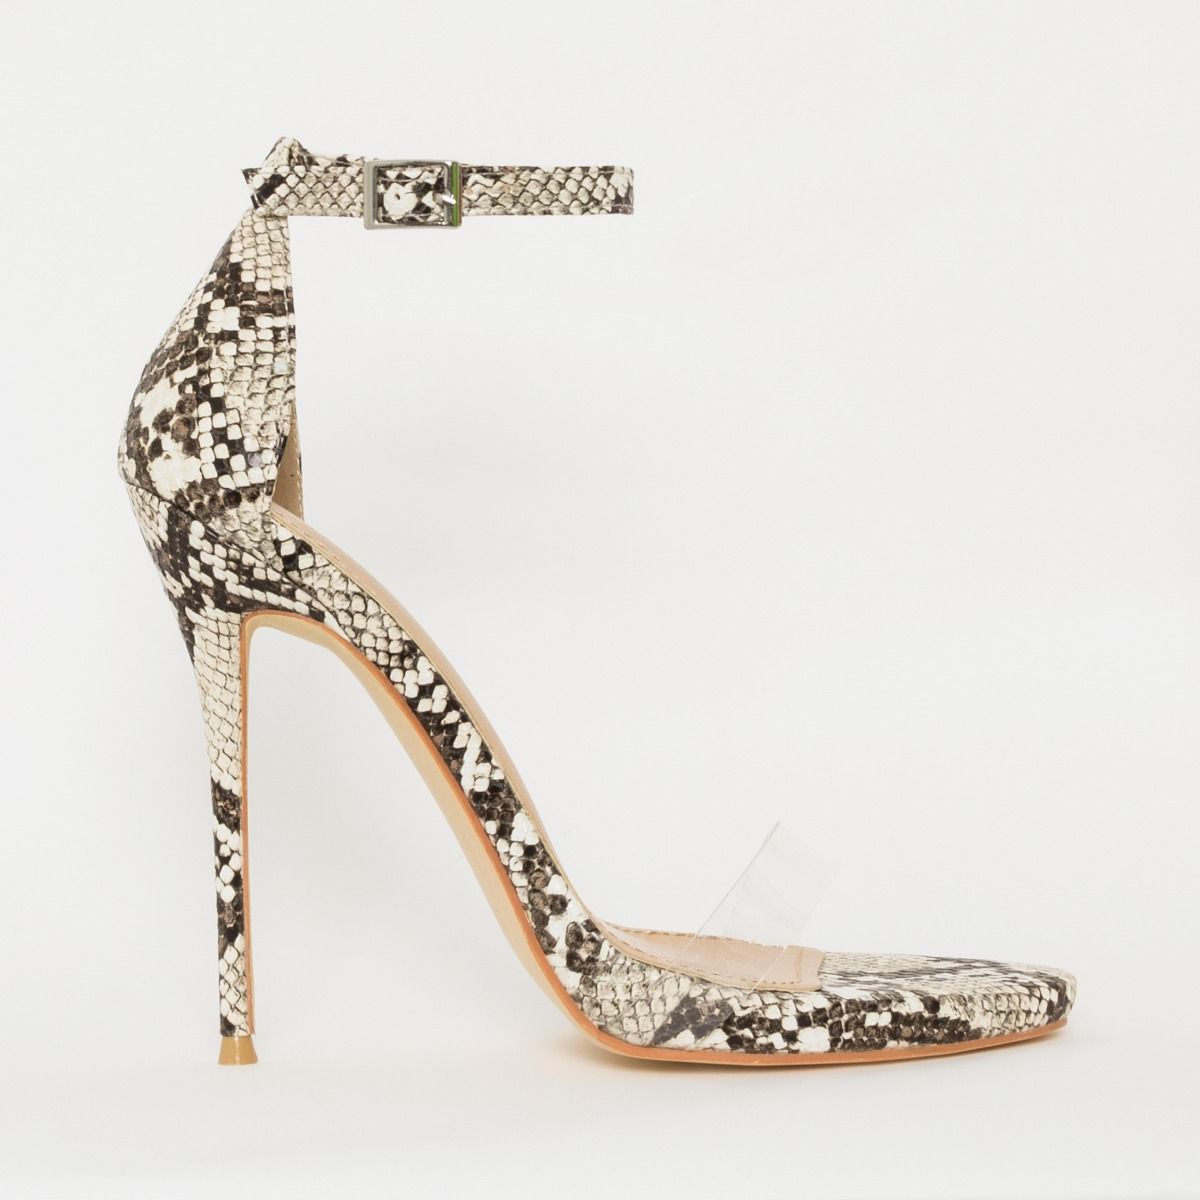 Elsie Beige Snake Print Patent Barely There Stiletto Heels